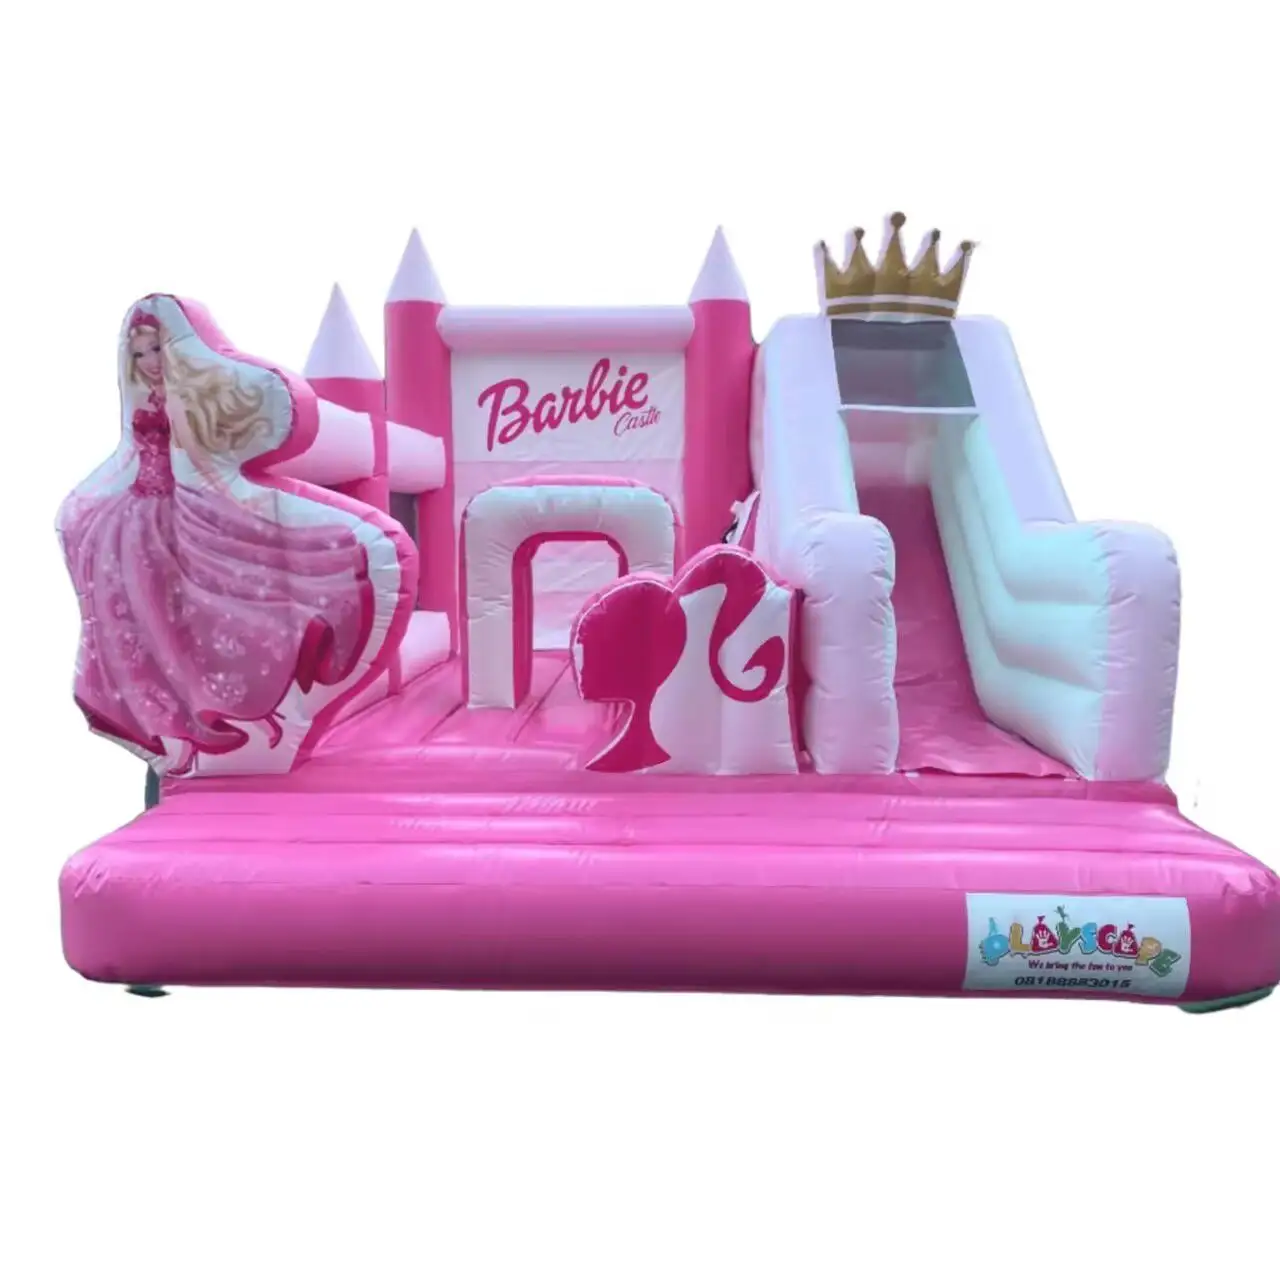 Barbie themed inflatable slide for girls Commercial princess theme inflatable bouncer slide combo for sale or party rental